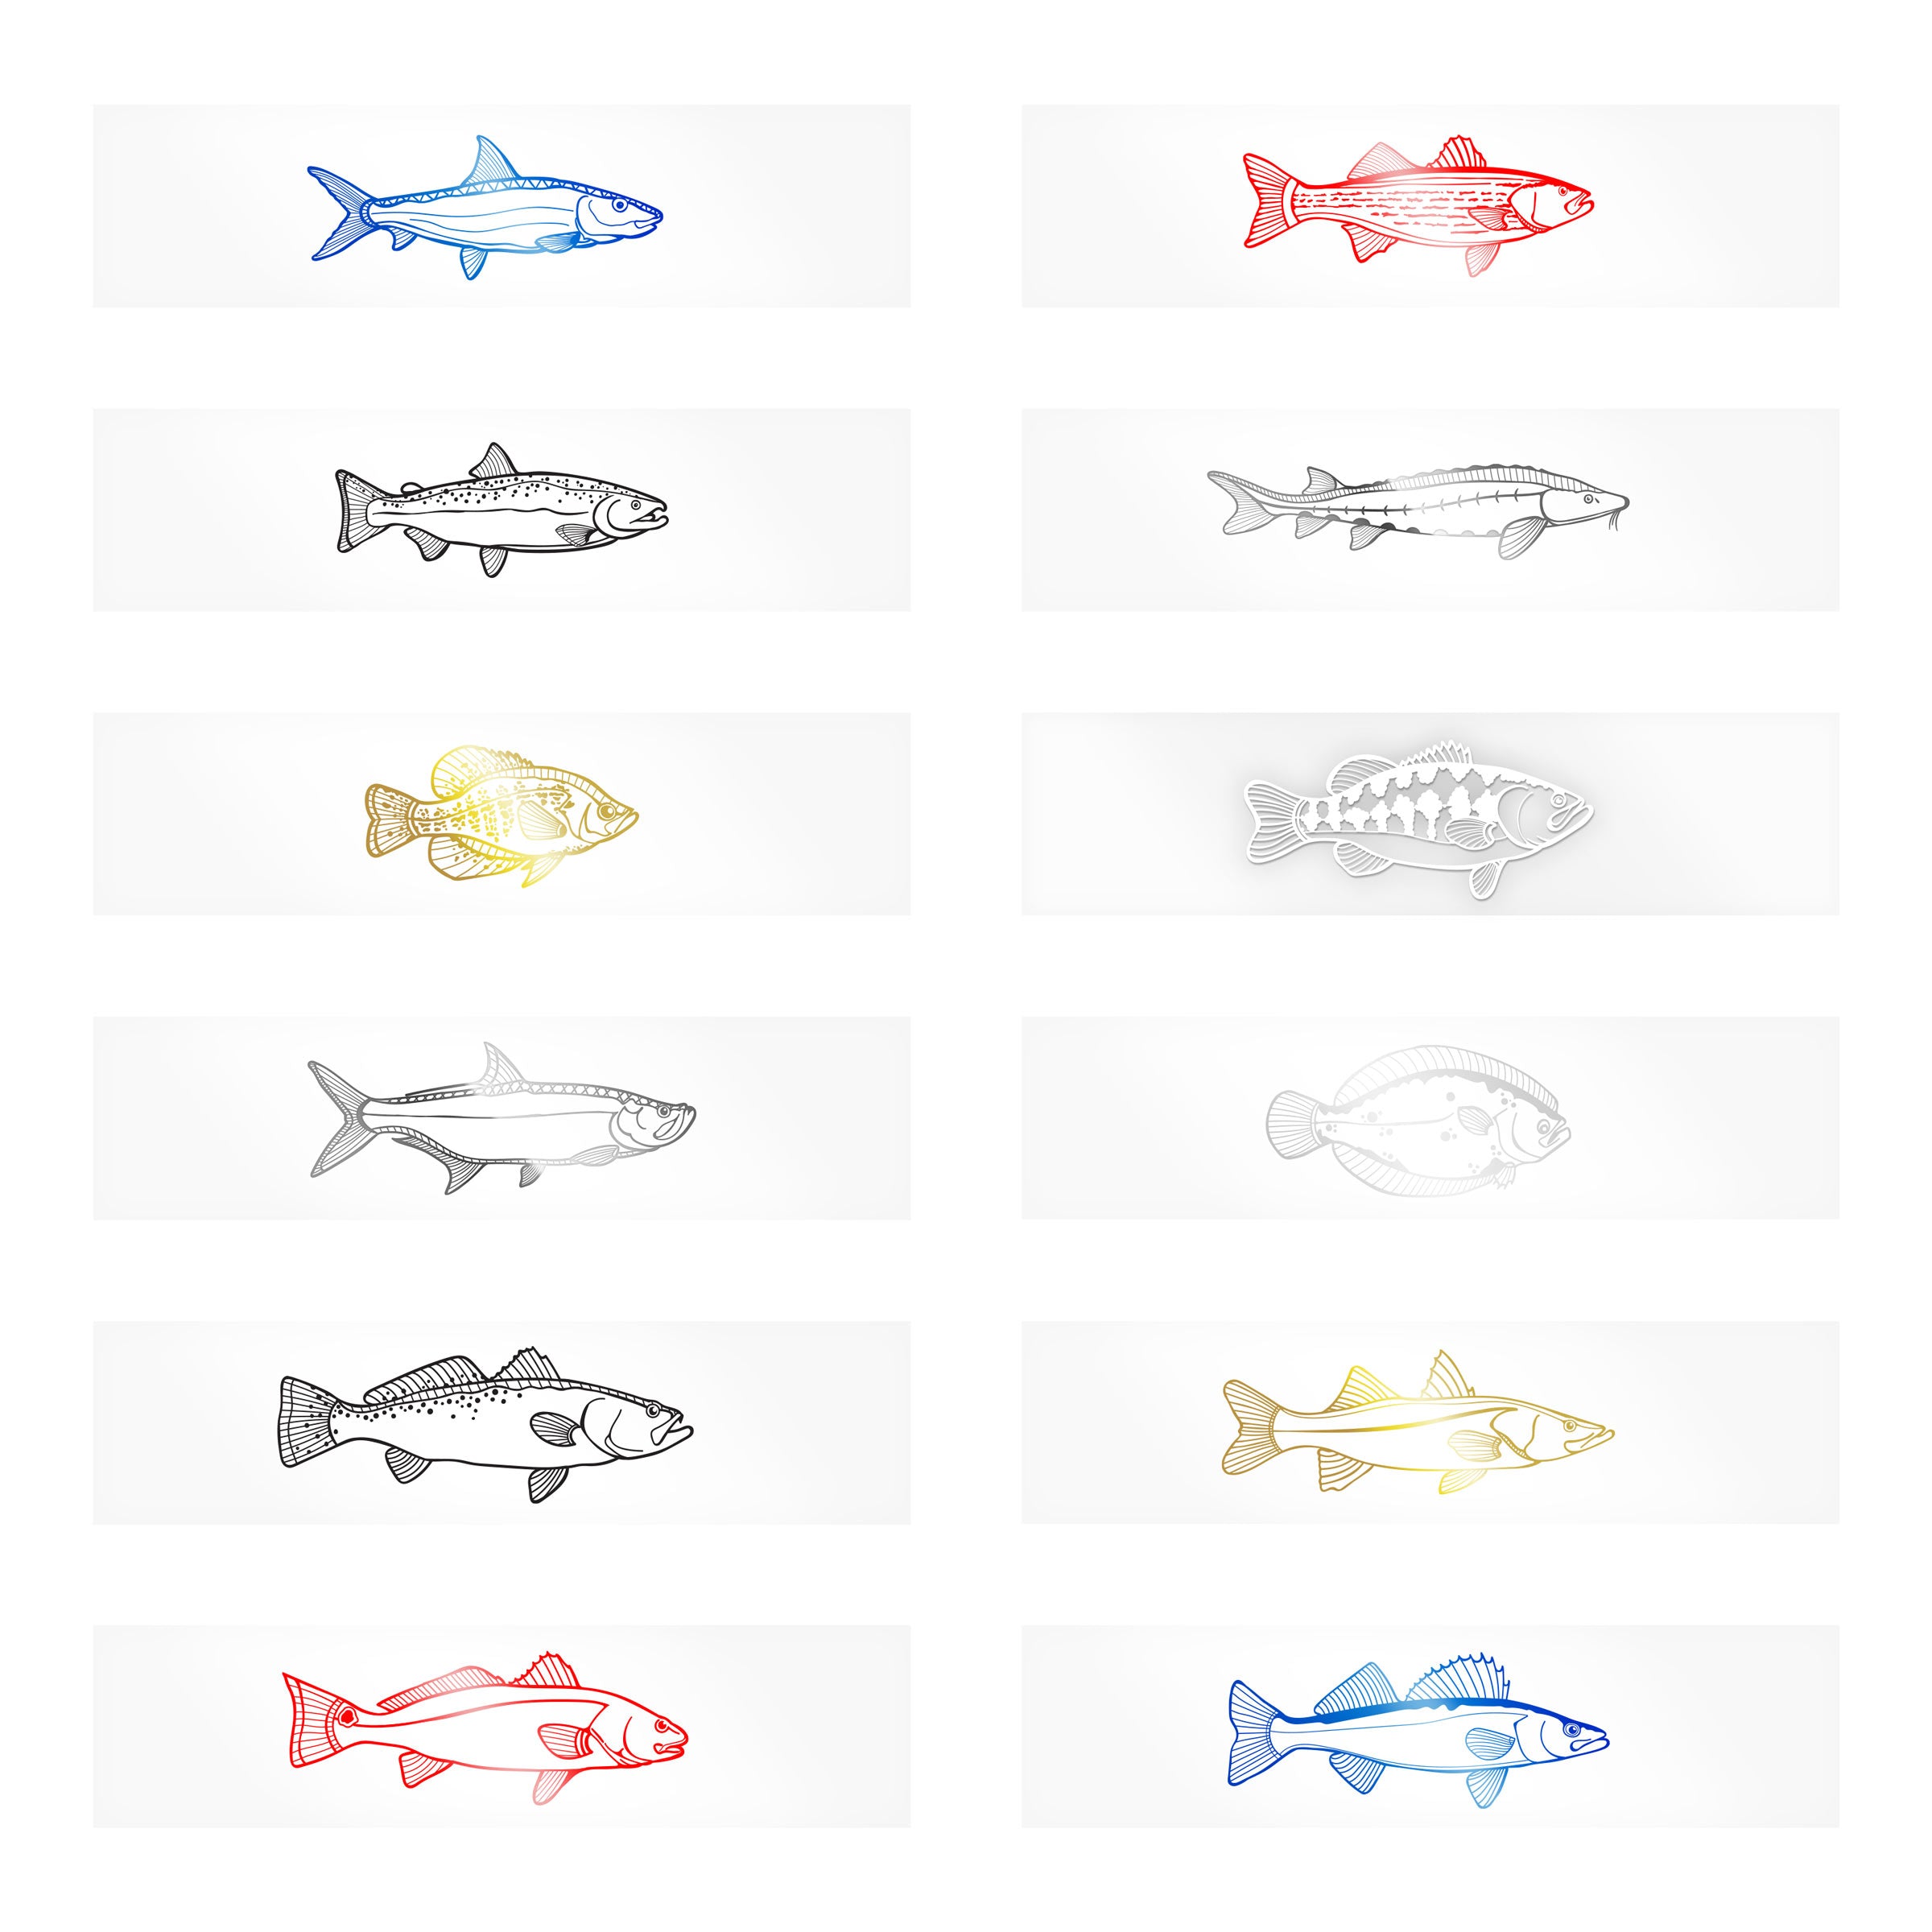 SALE! Fish on decal for tuna decals & stickers online - 10% OFF